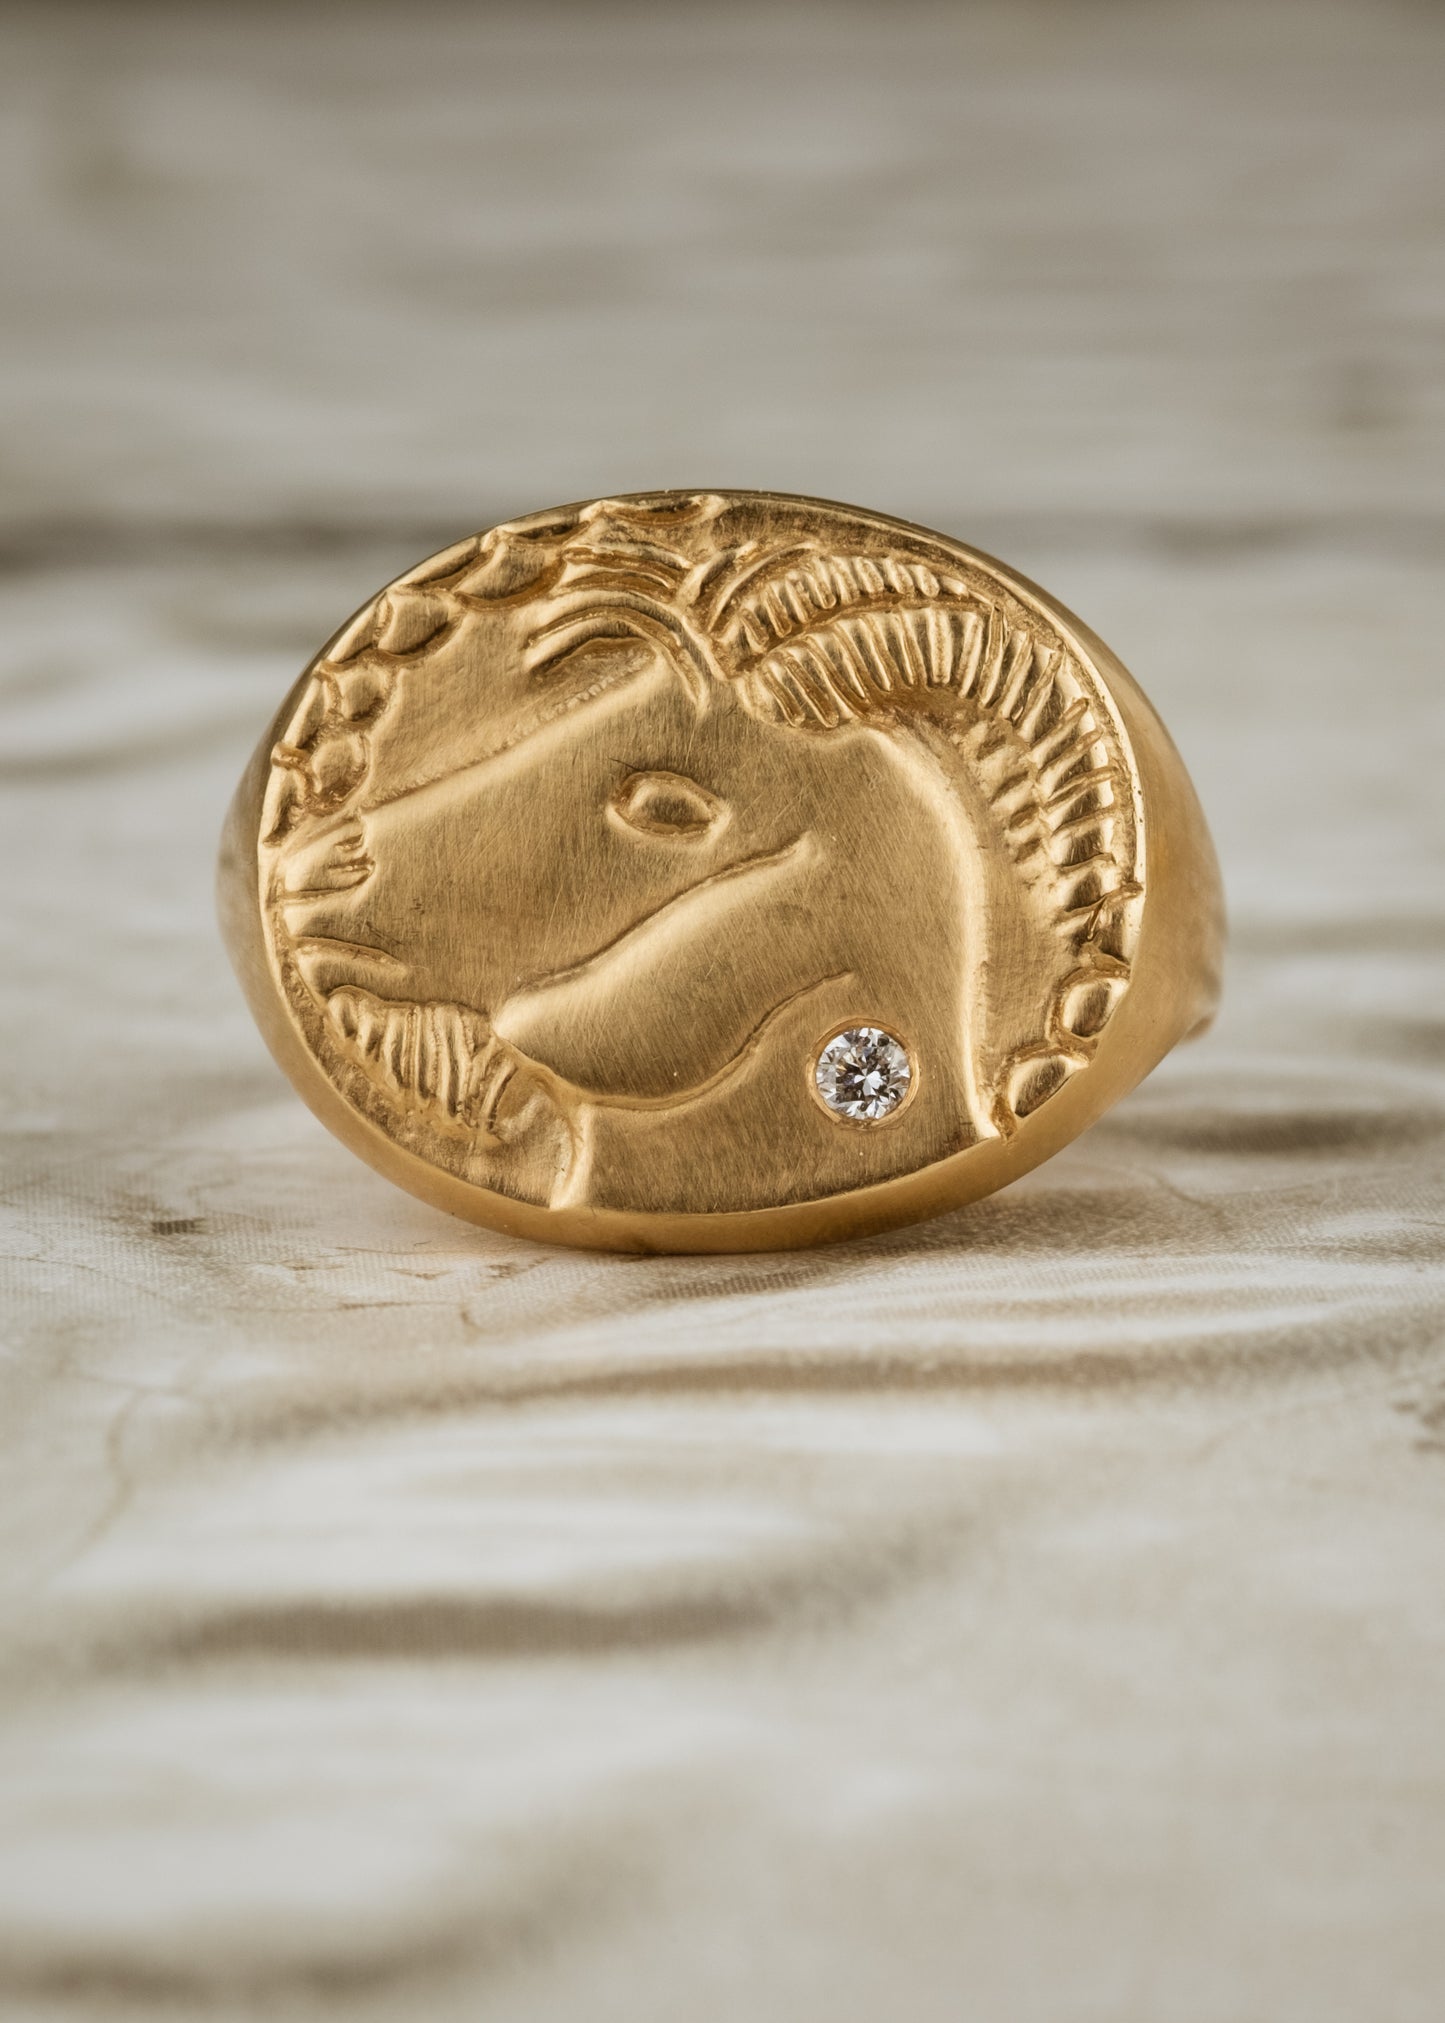 The tenth sign of the Zodiac, Earth sign Capricorn is fiercely independent and responsible, grounded in reality that they can mold to their will. A hand-carved, moody bearded goat is accented with a precious diamond for a ring that captures the power of the celestial sky.